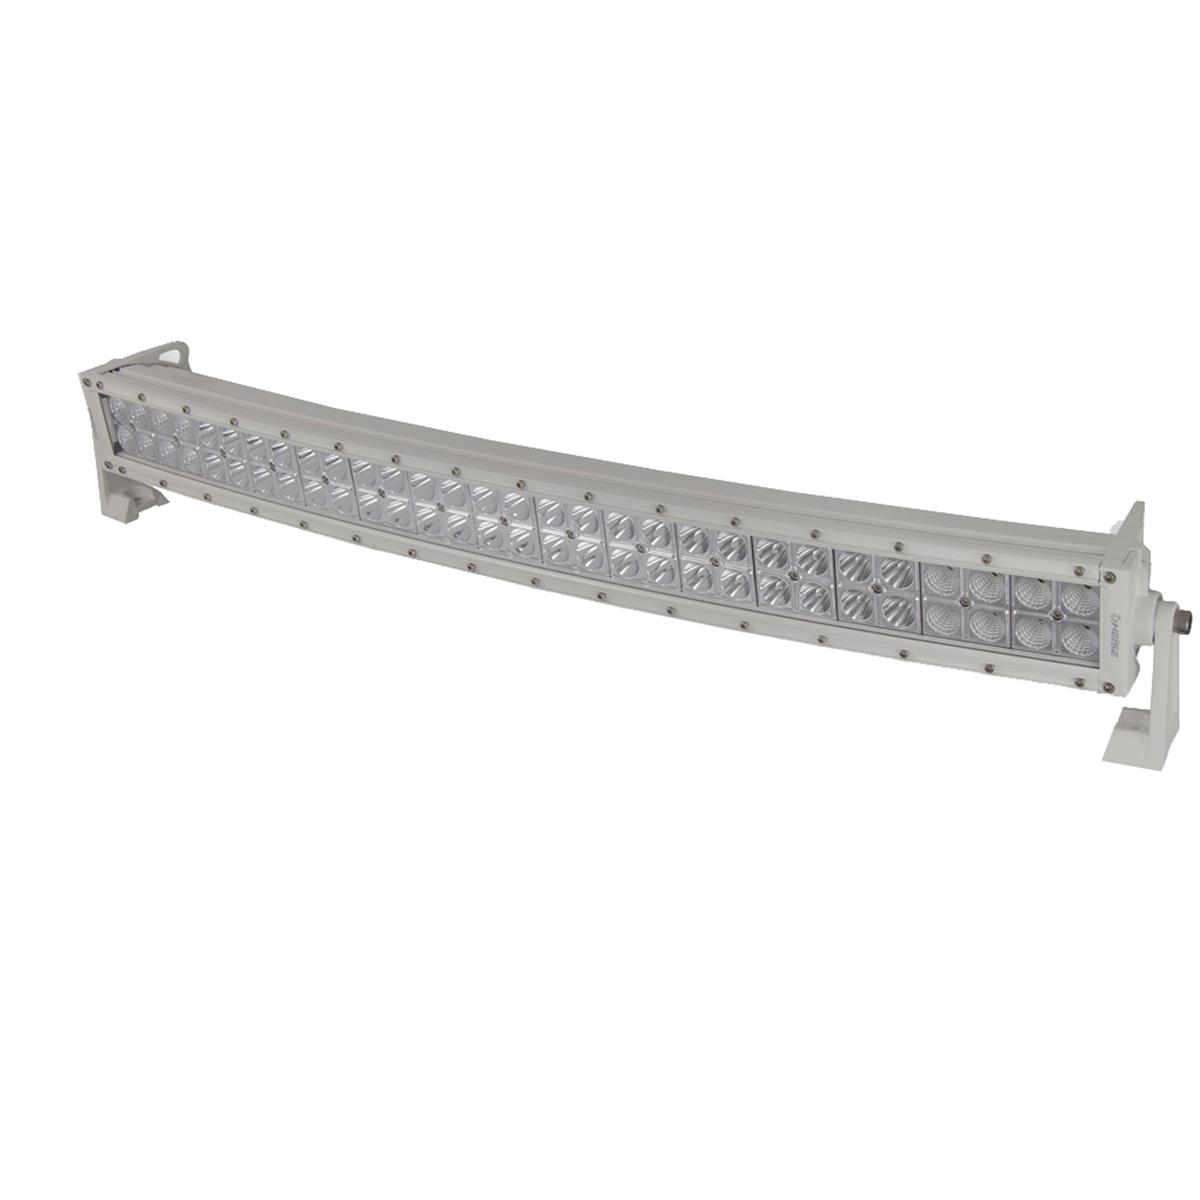 HE-MDRC30 Dual Row Marine LED Curved Light Bar - 30 in -  HEISE LED Lighting Systems